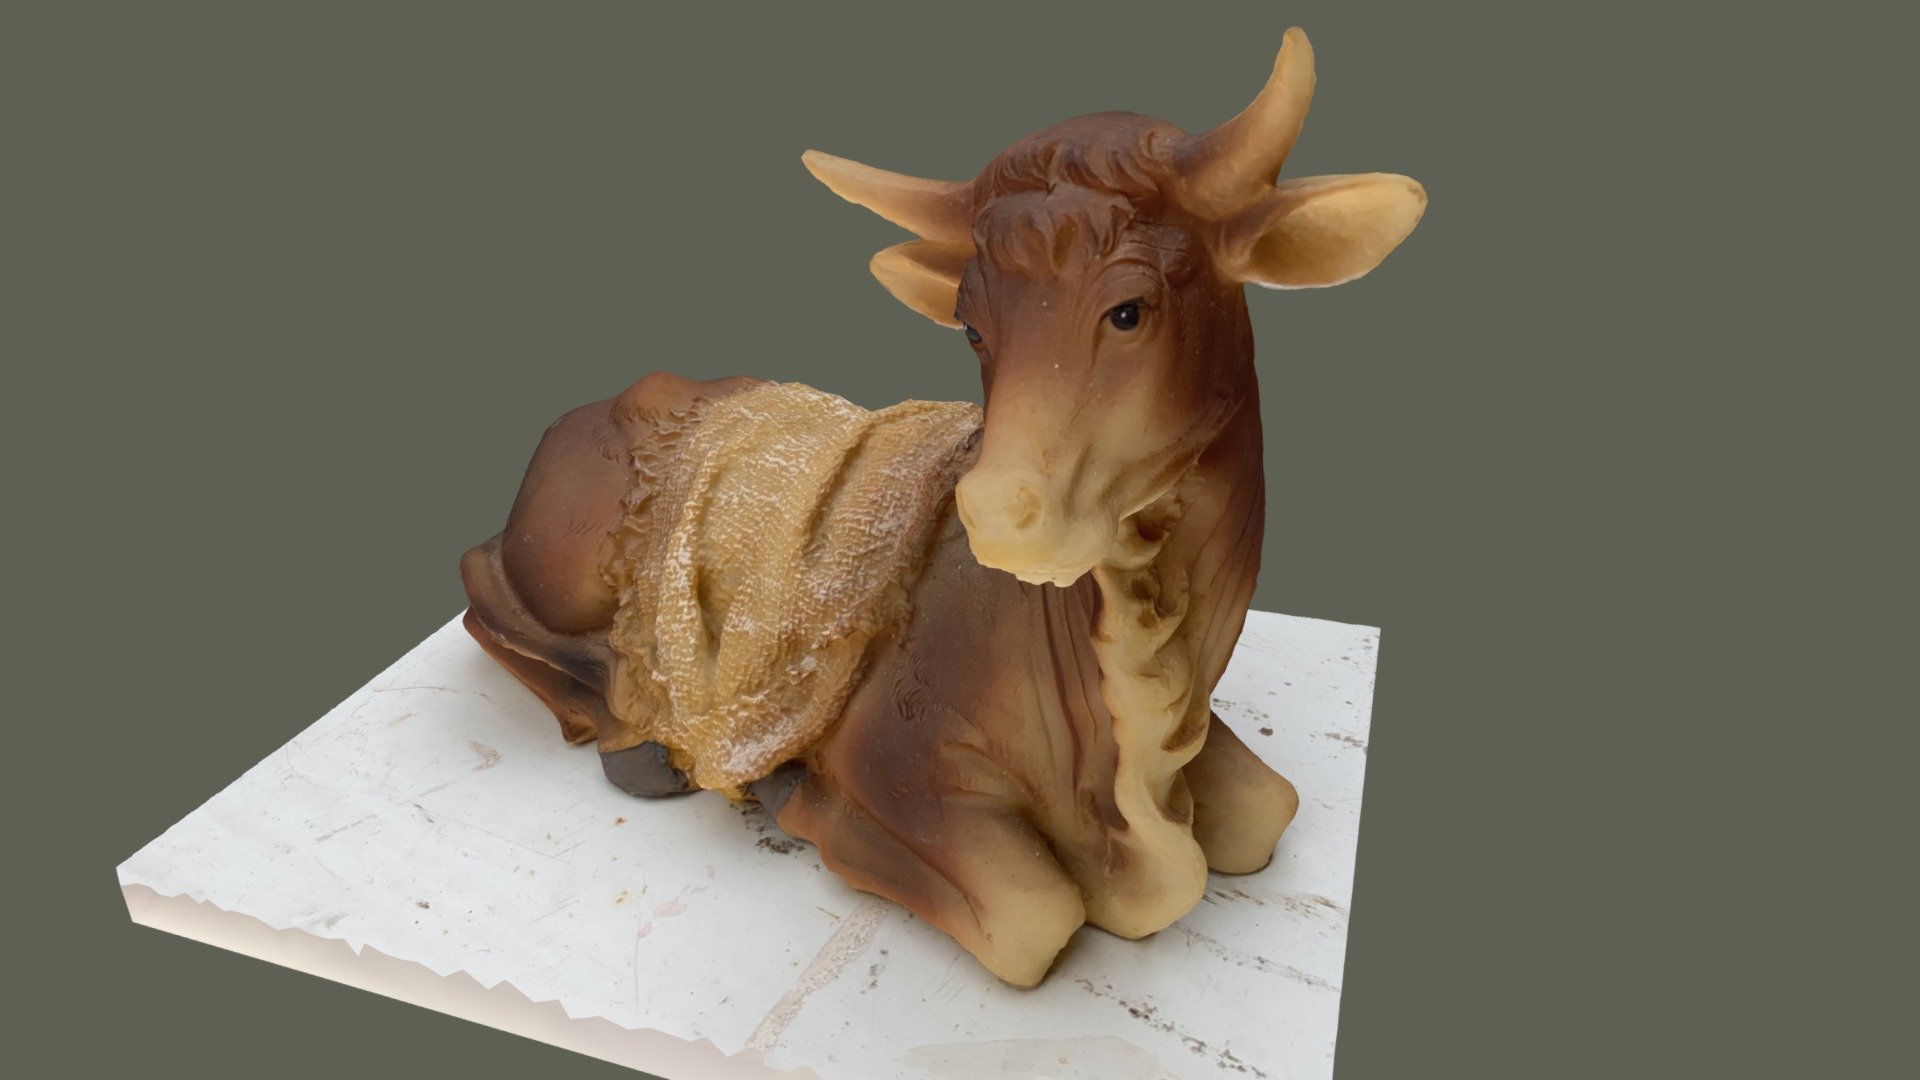 A cow statue for use in a Christmas nativity scene, captured with RealityScan photogrammetry software 3d model